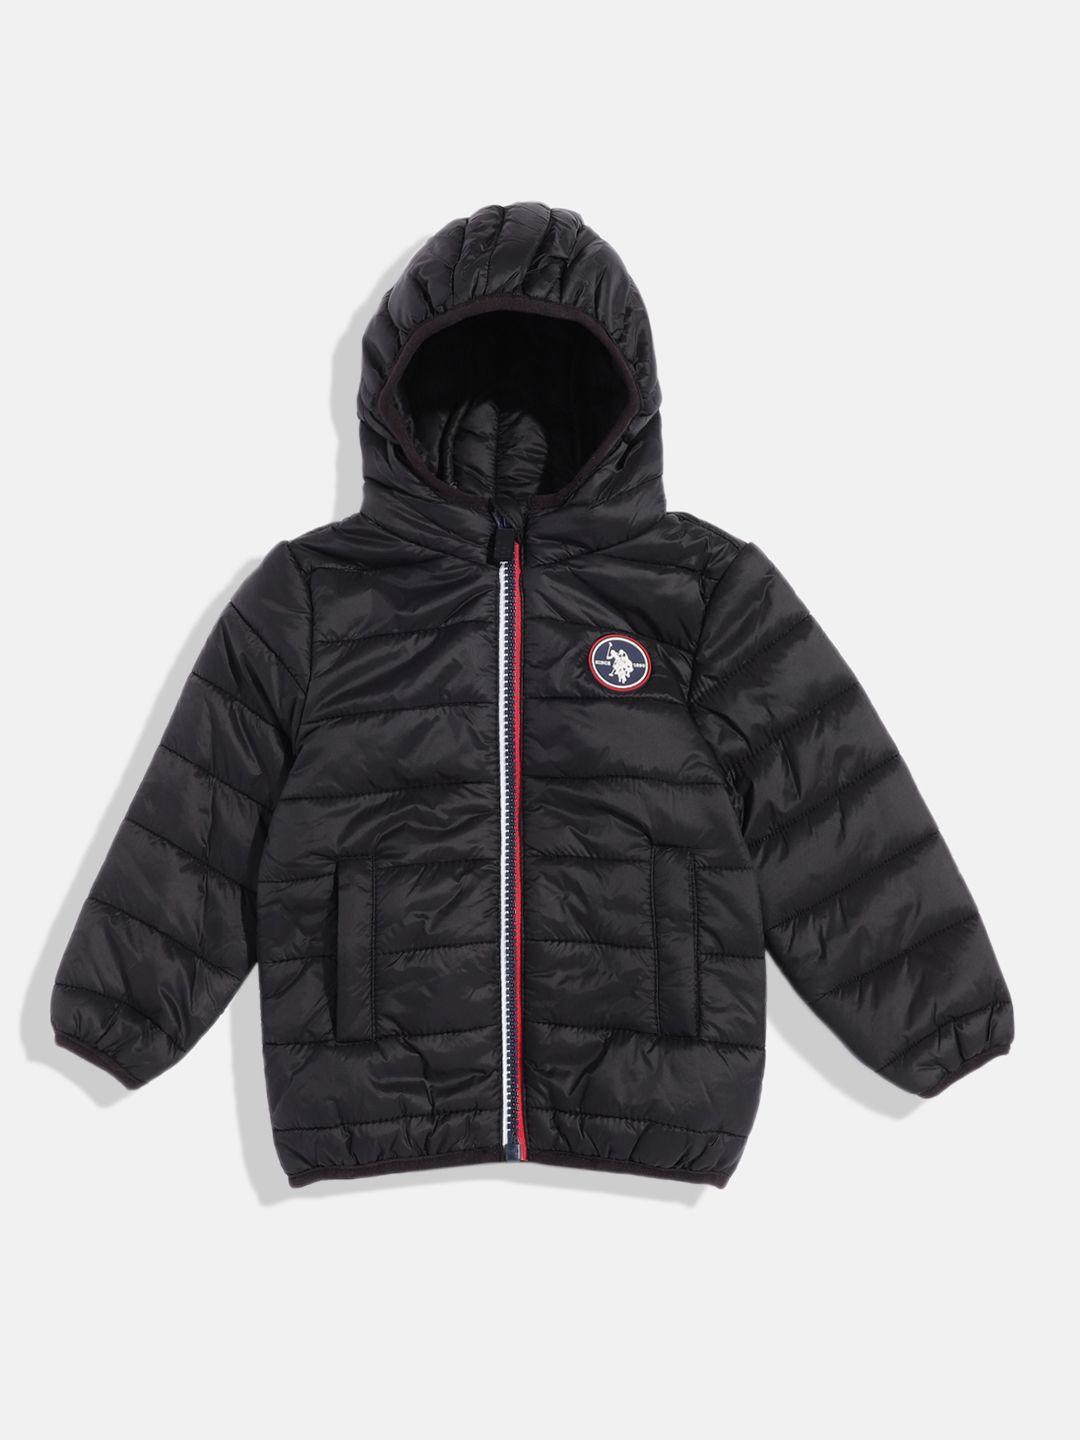 U.S. Polo Assn. Kids Boys Solid Hooded Puffer Jacket With Brand Logo Applique Detail